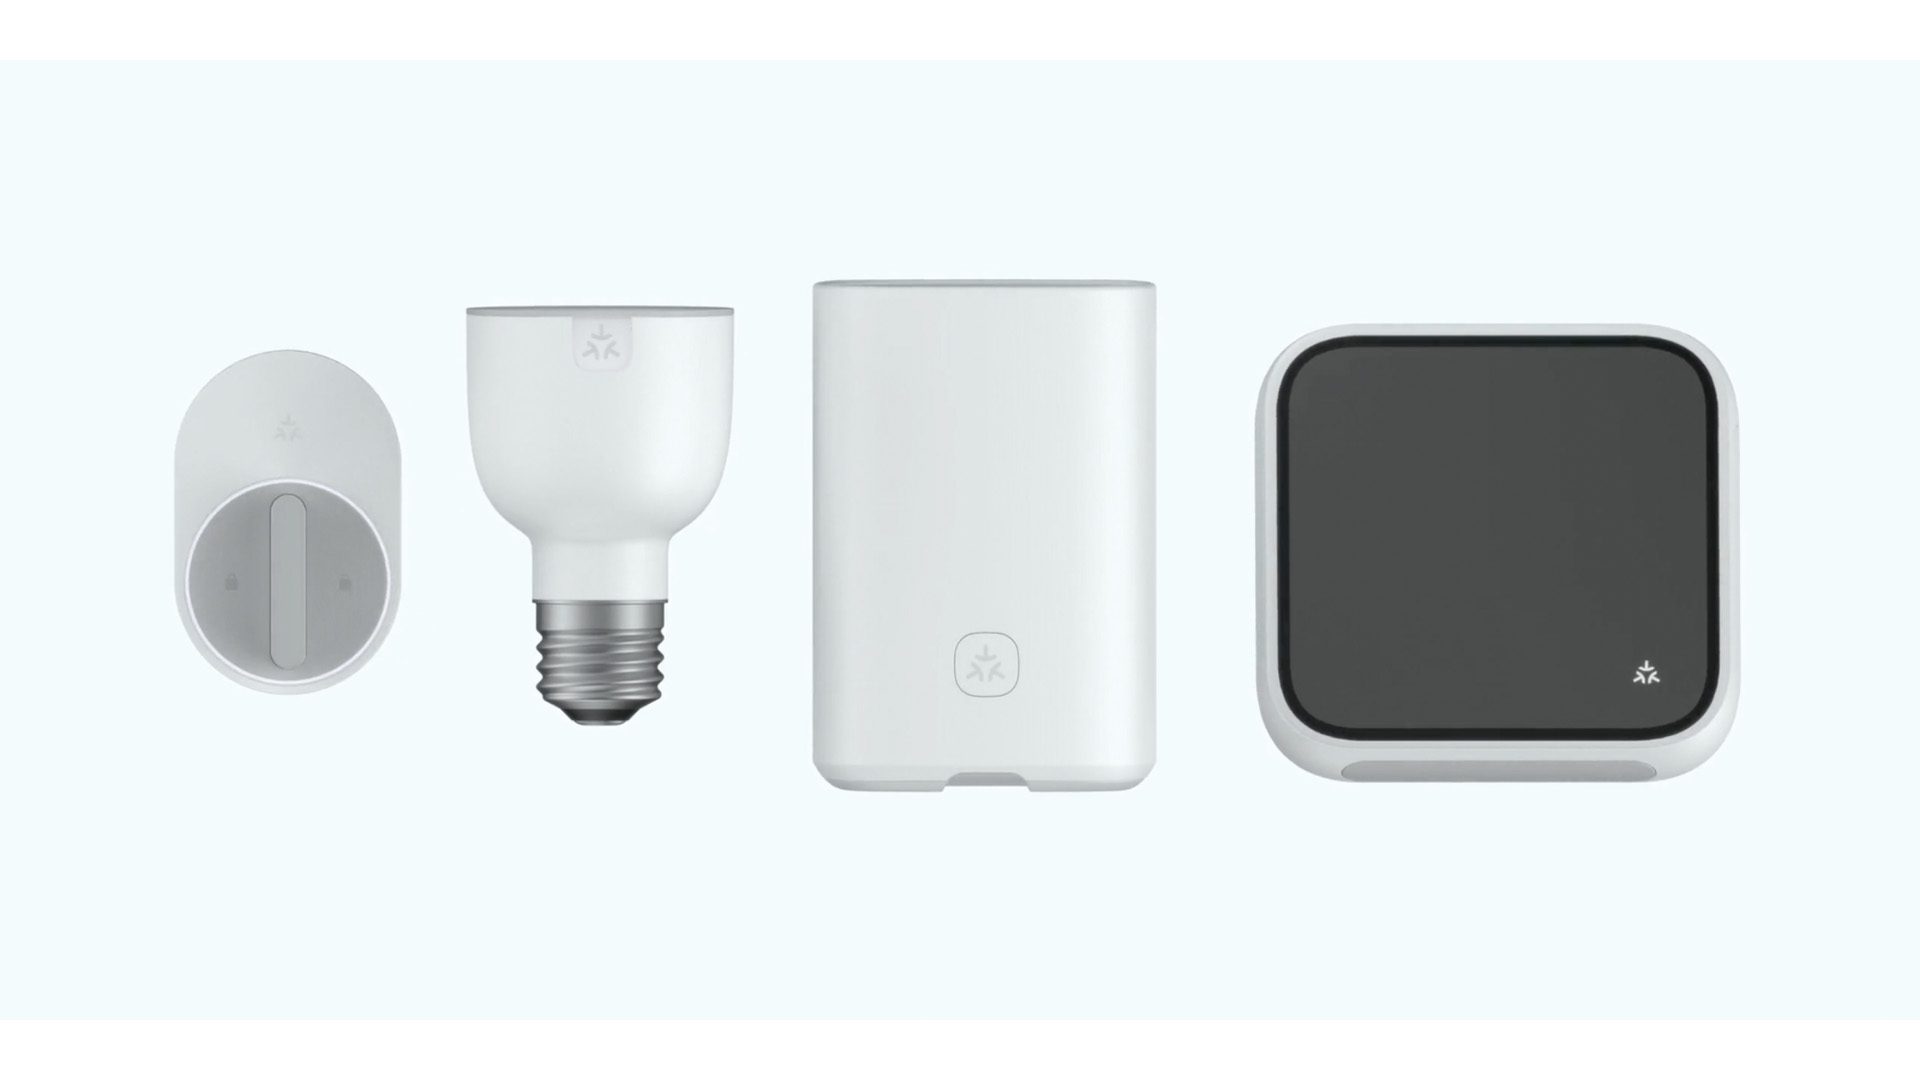 Matter-certified devices such as a lighbulb